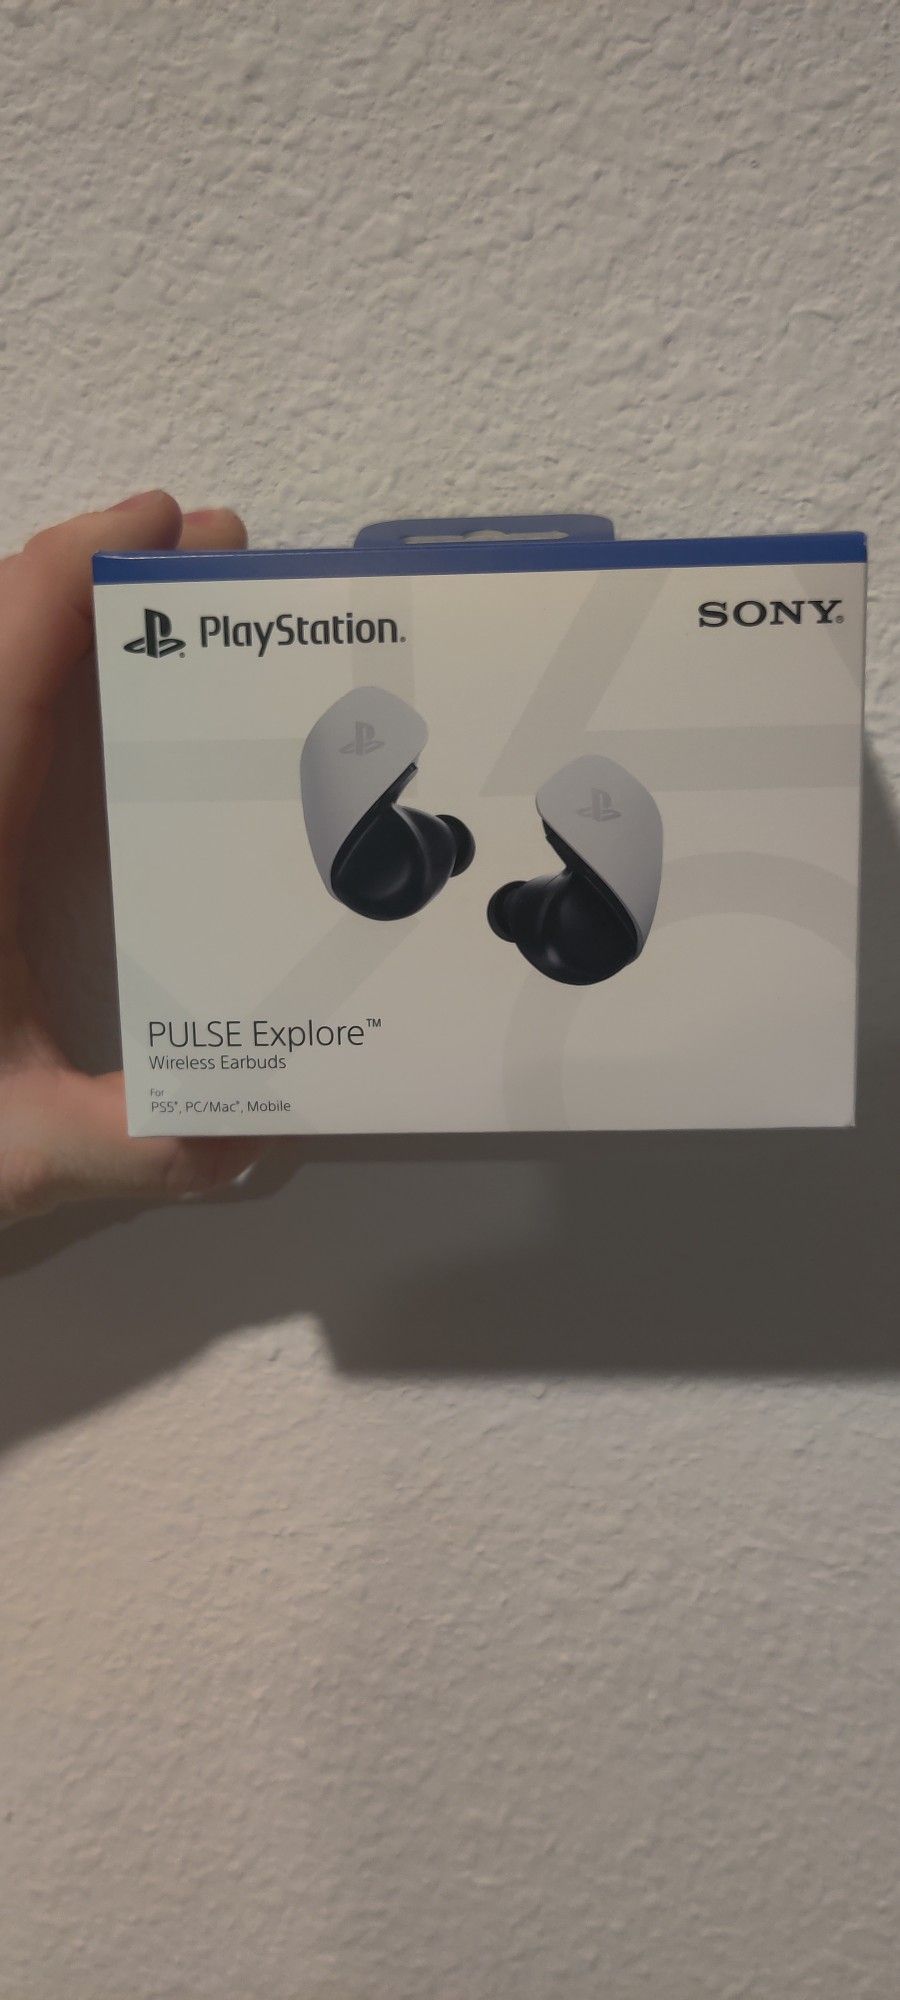 Sony PULSE Explore Wireless Earbuds - White PlayStation 5 Brand New Sealed